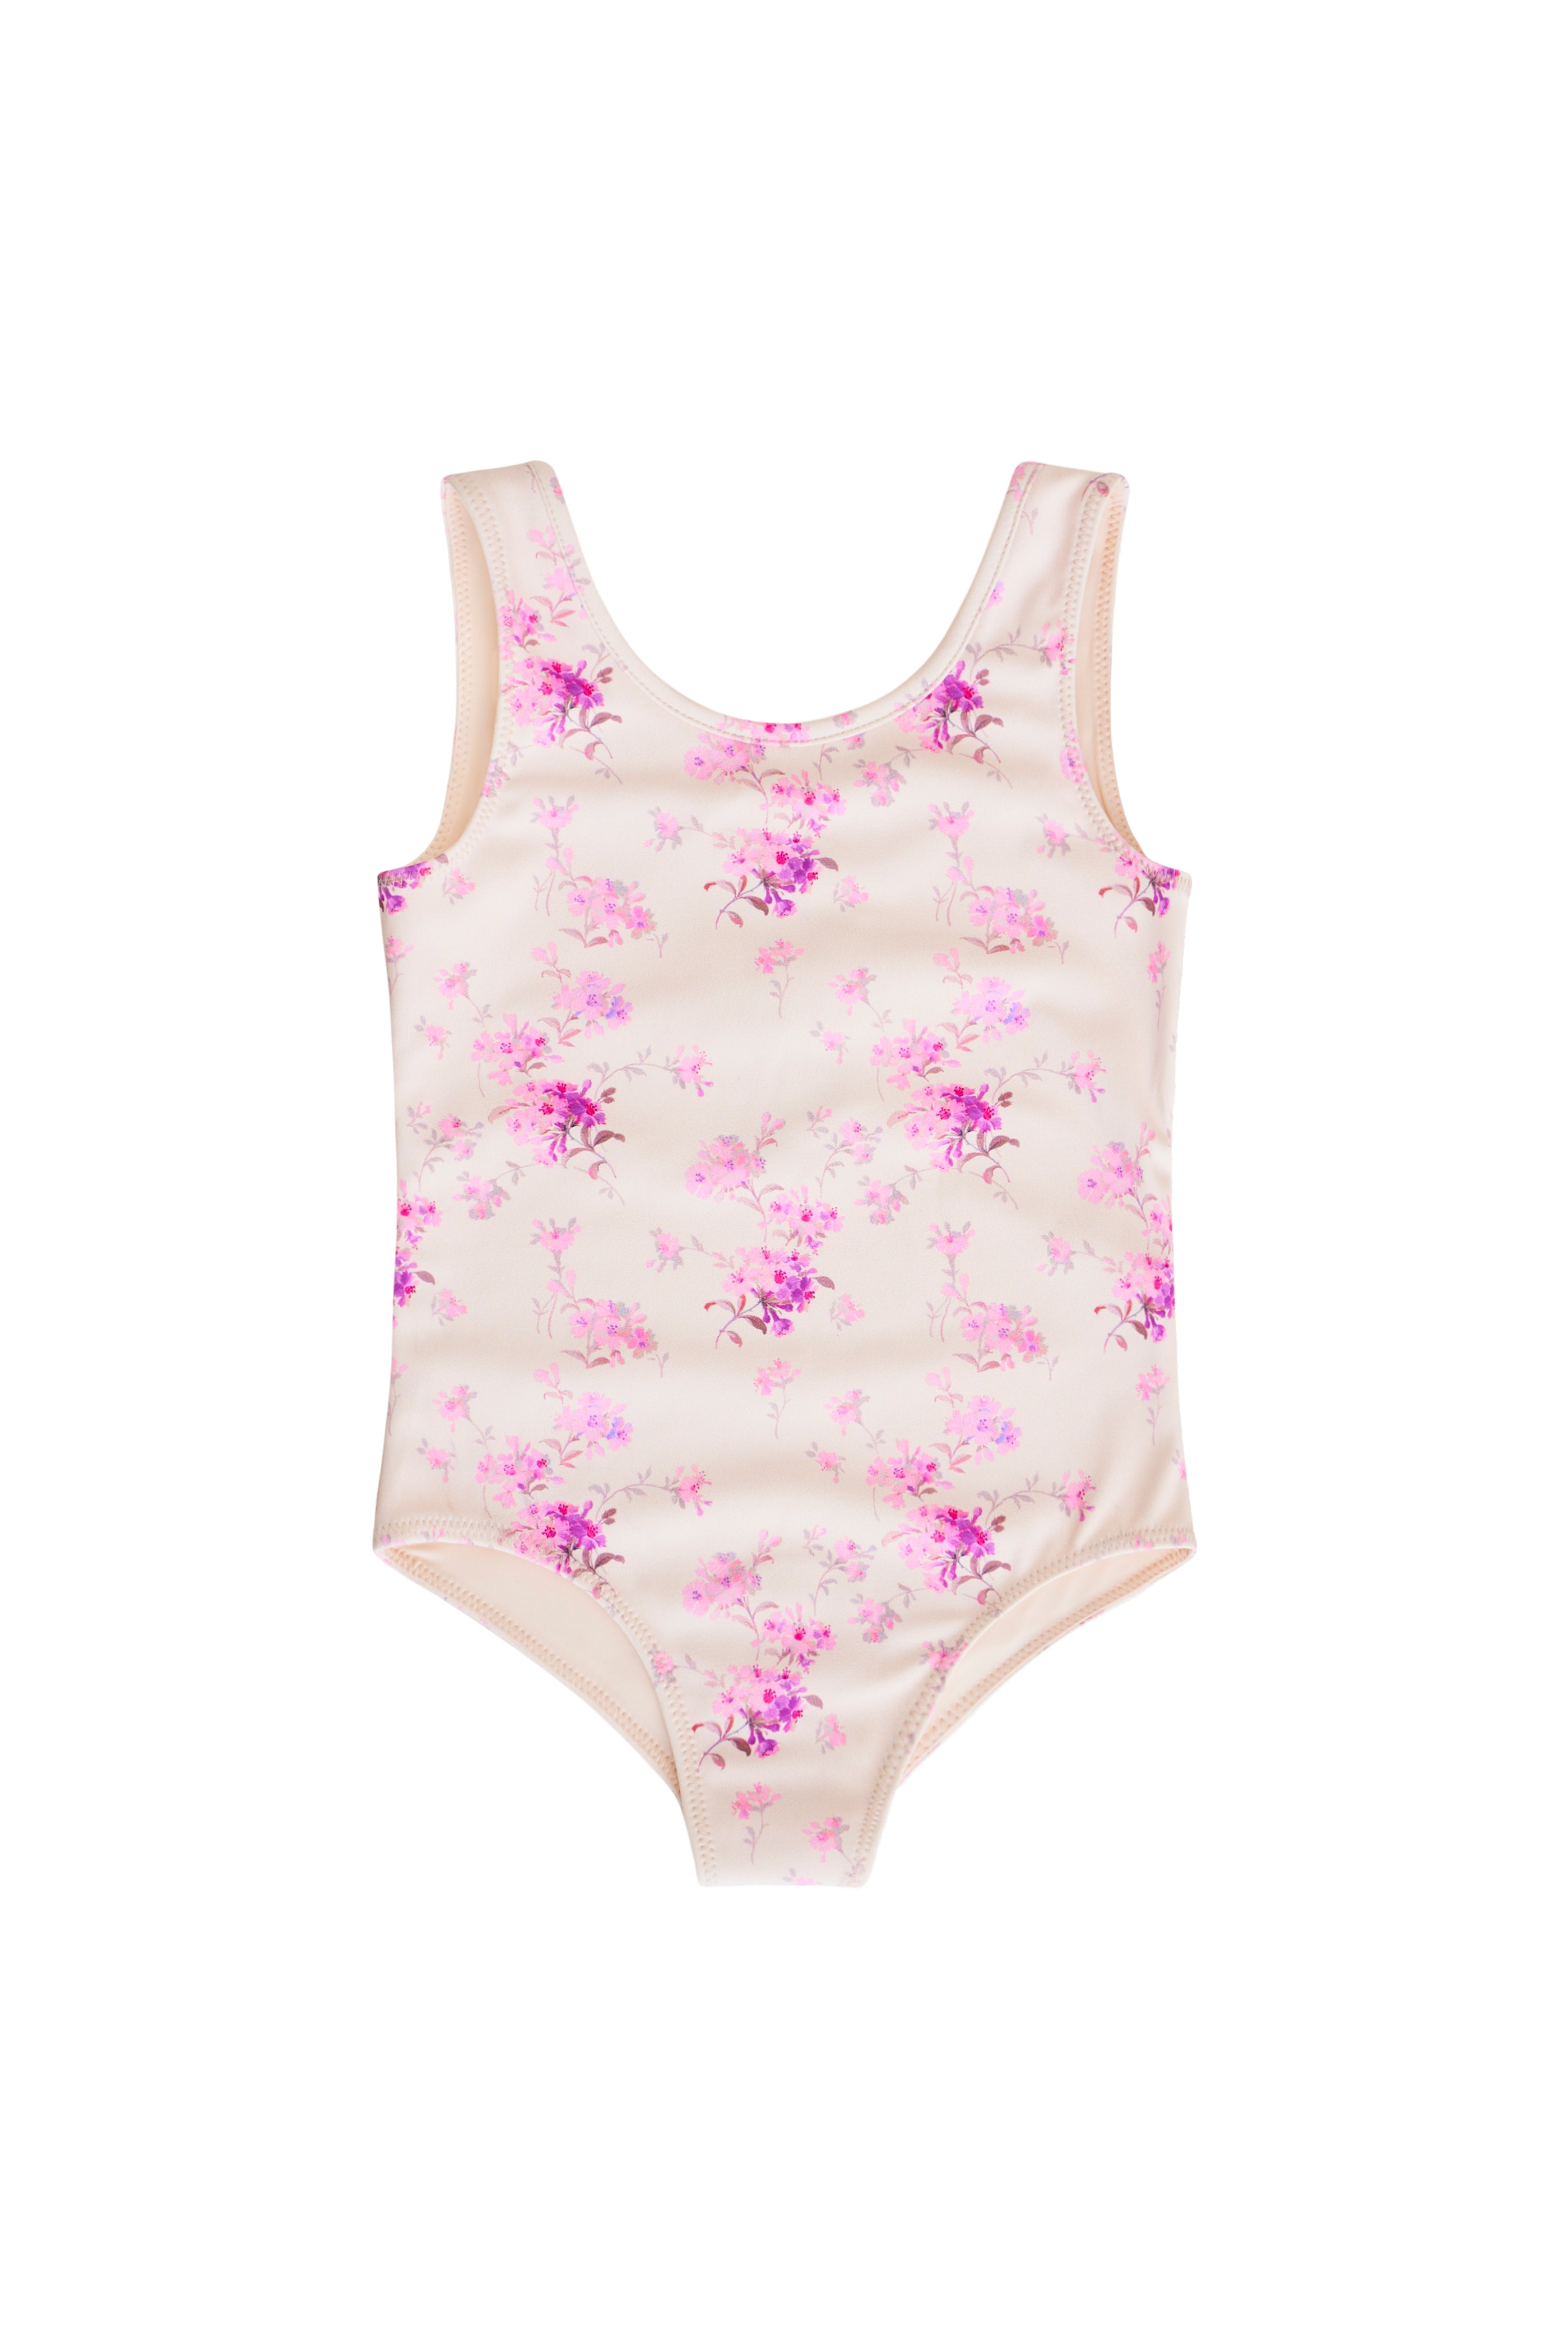 One piece features a vibrant dainty floral print all over.